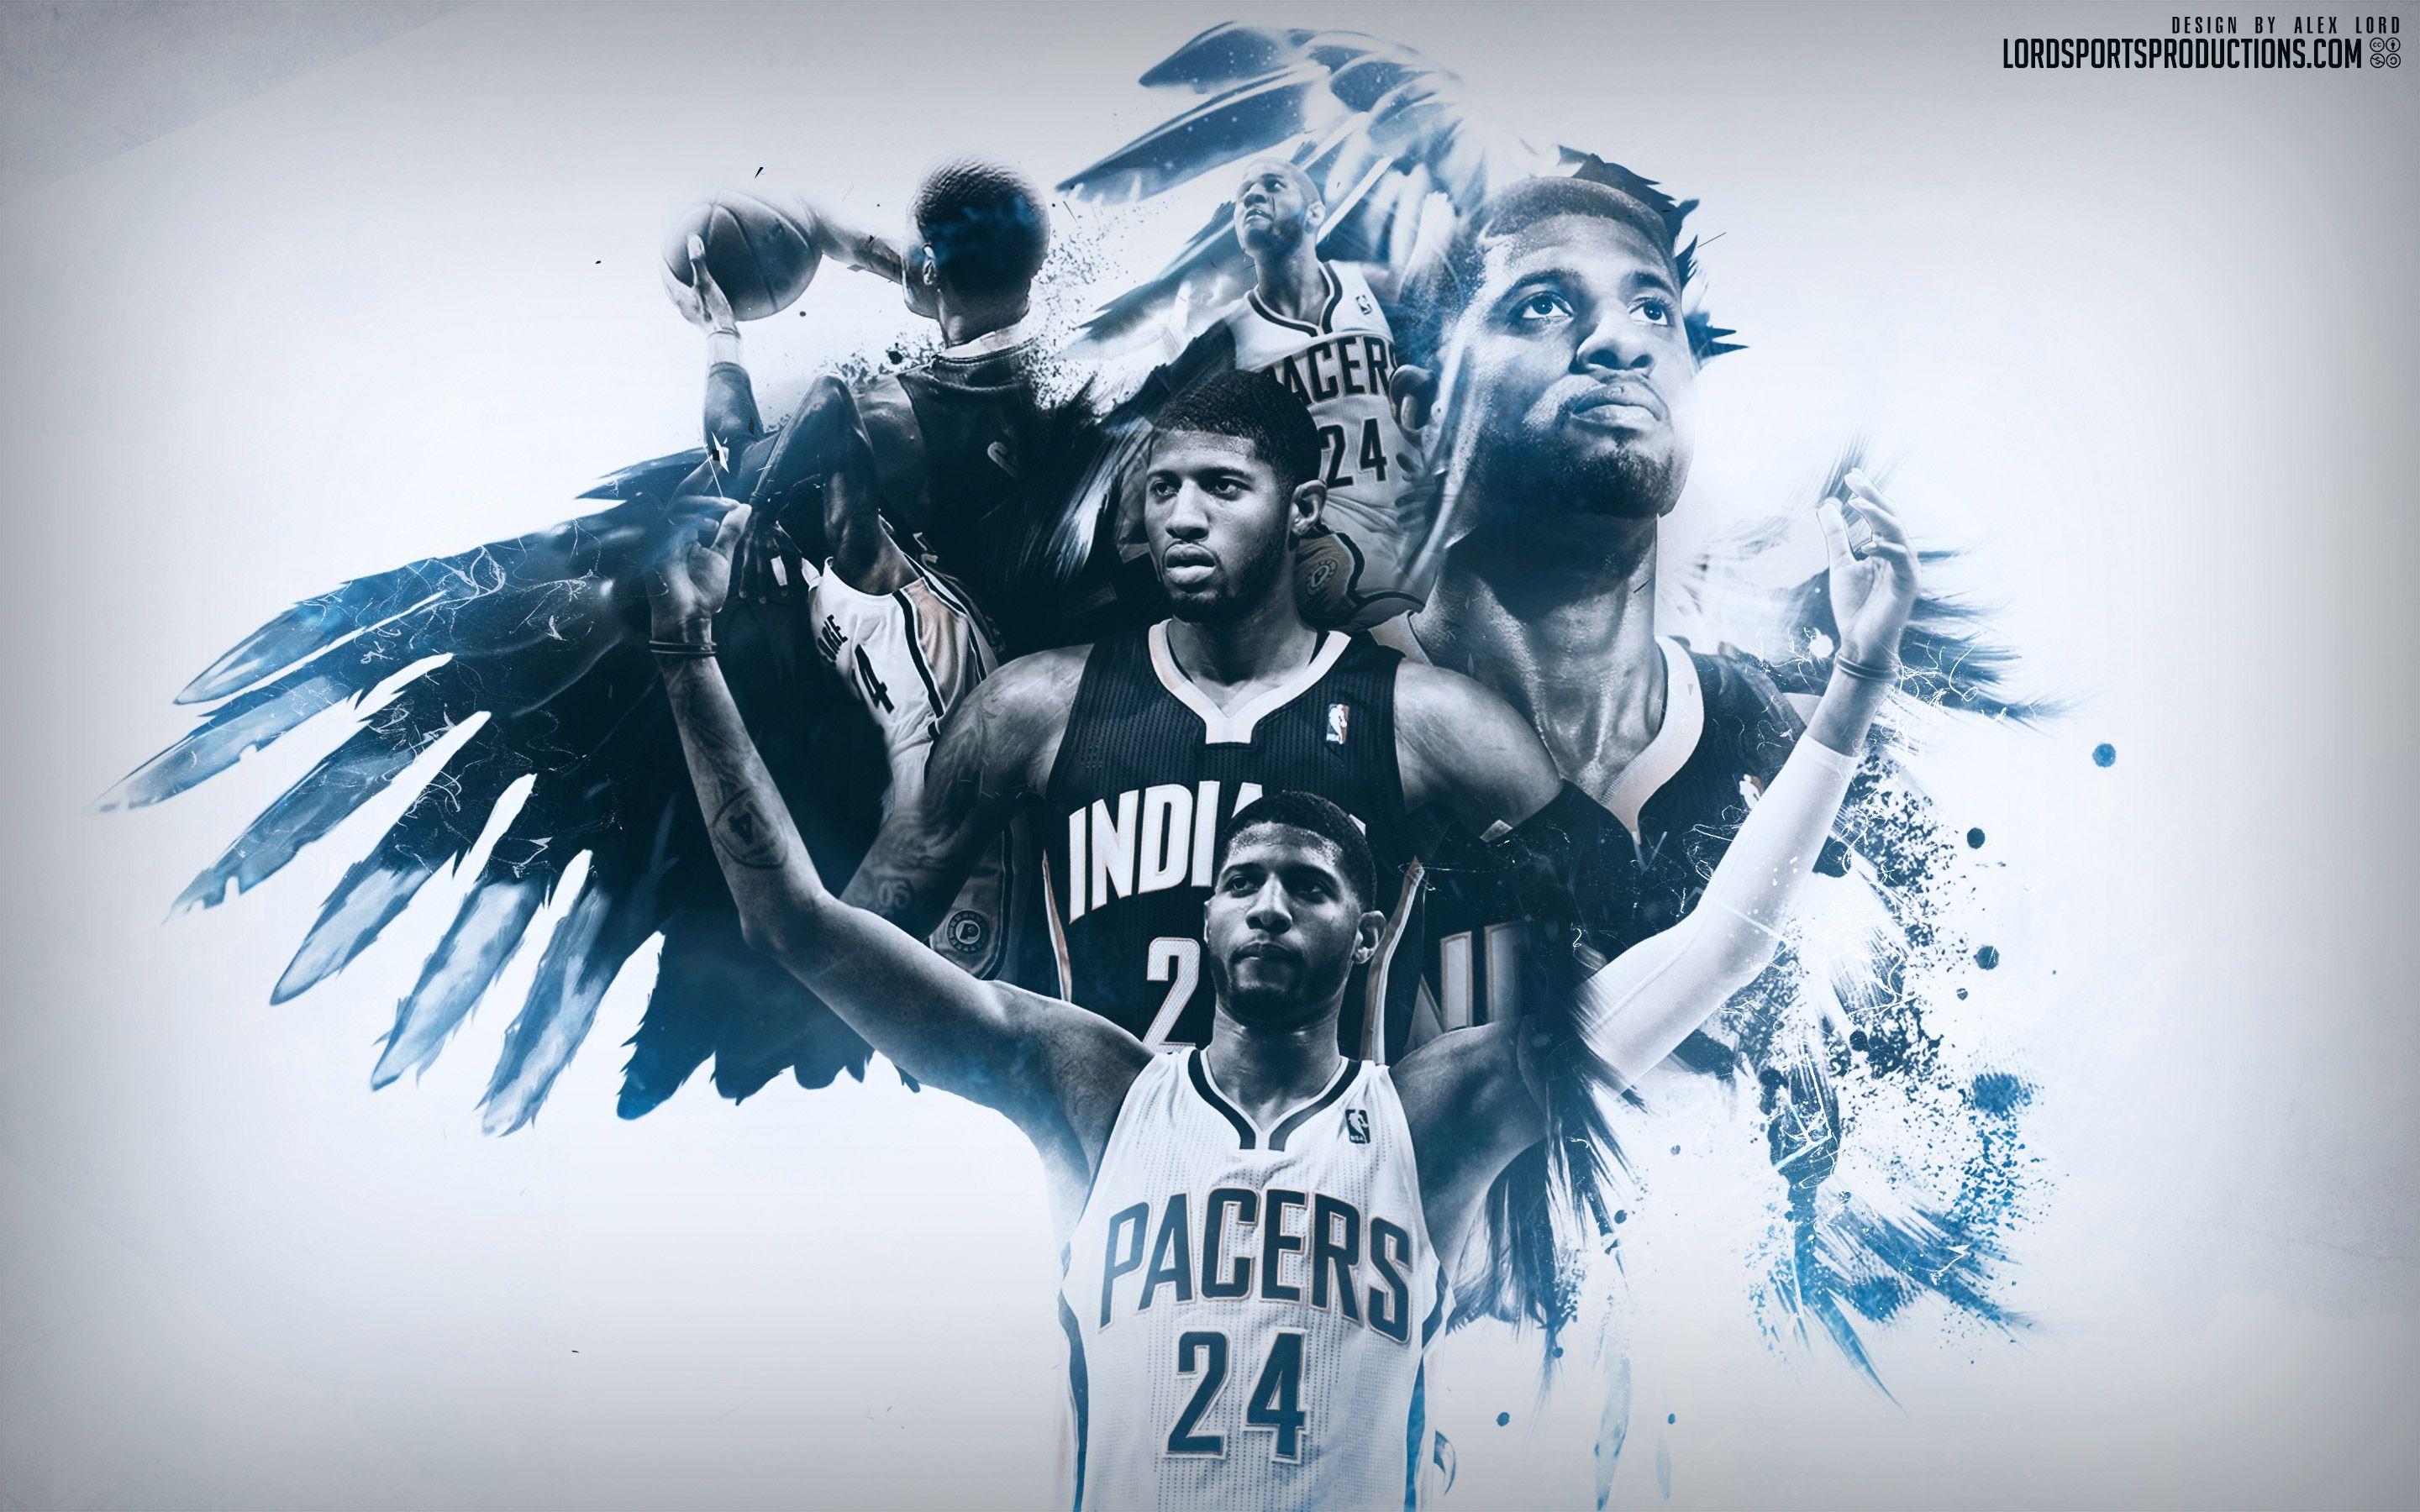 Paul George Indiana Pacers 2015 2016 Wallpaper. Basketball